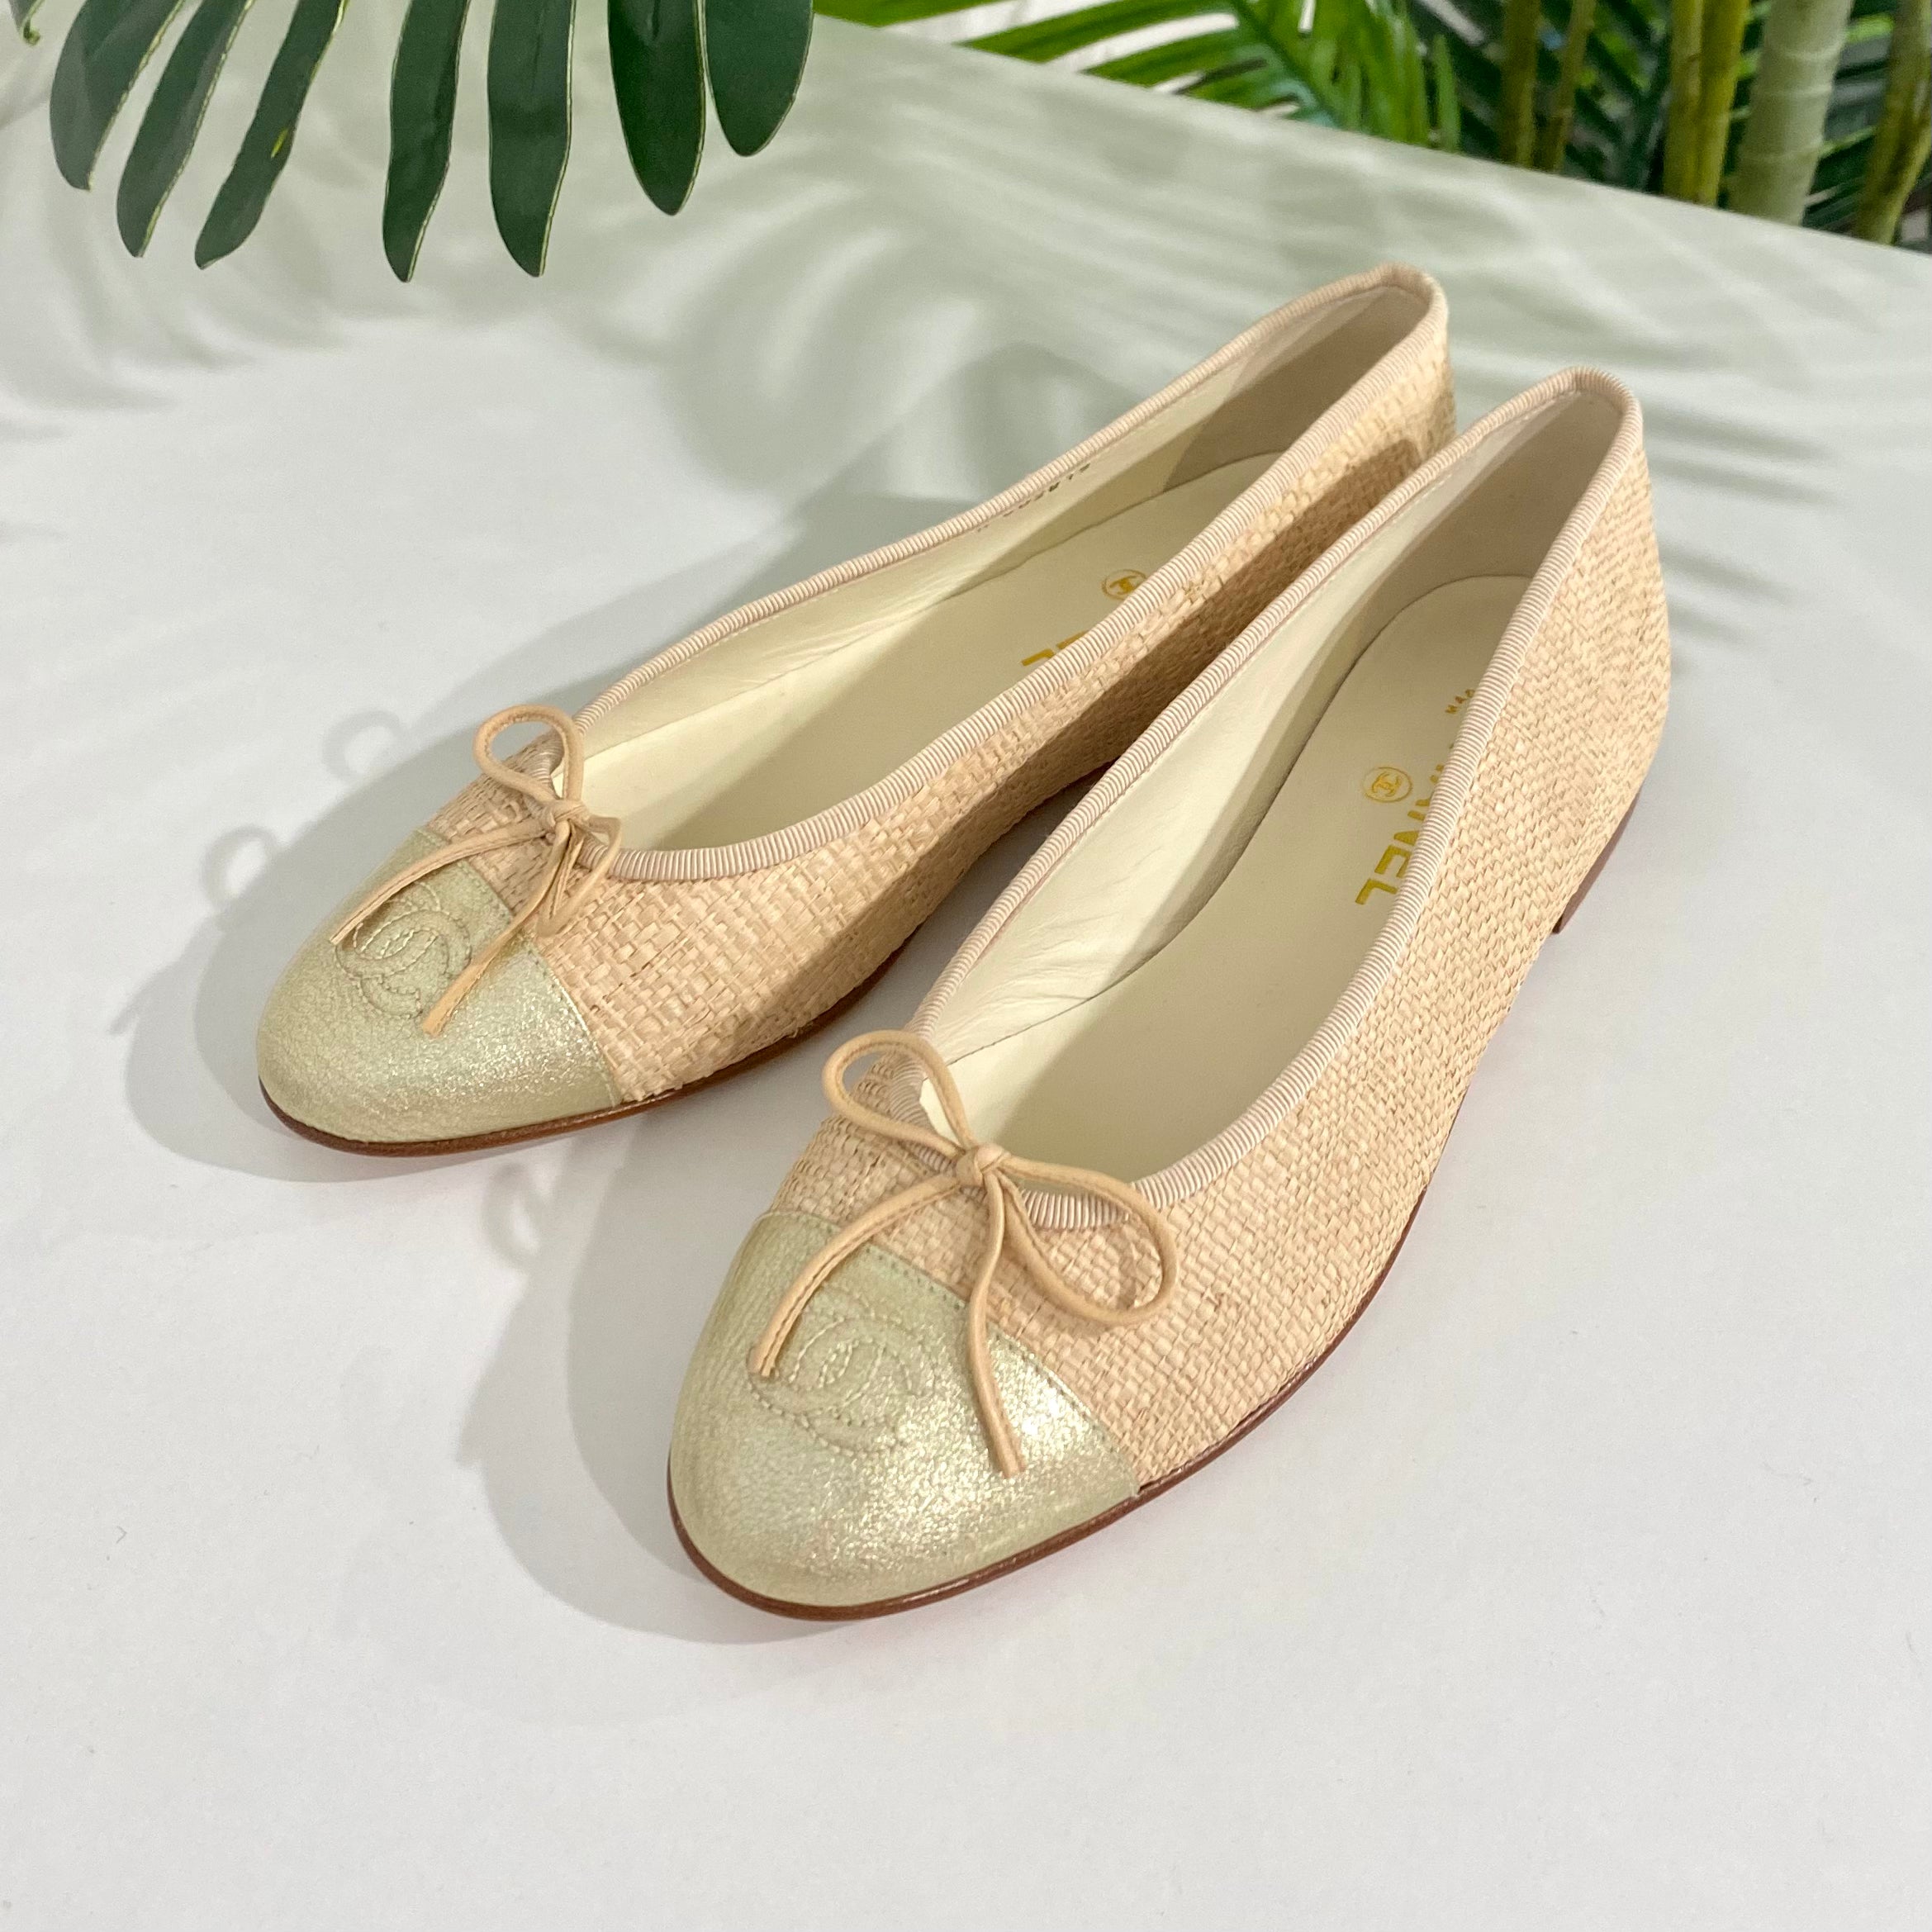 Chanel ballet flats: experience buying secondhand + first impressions -  Conscious by Komal